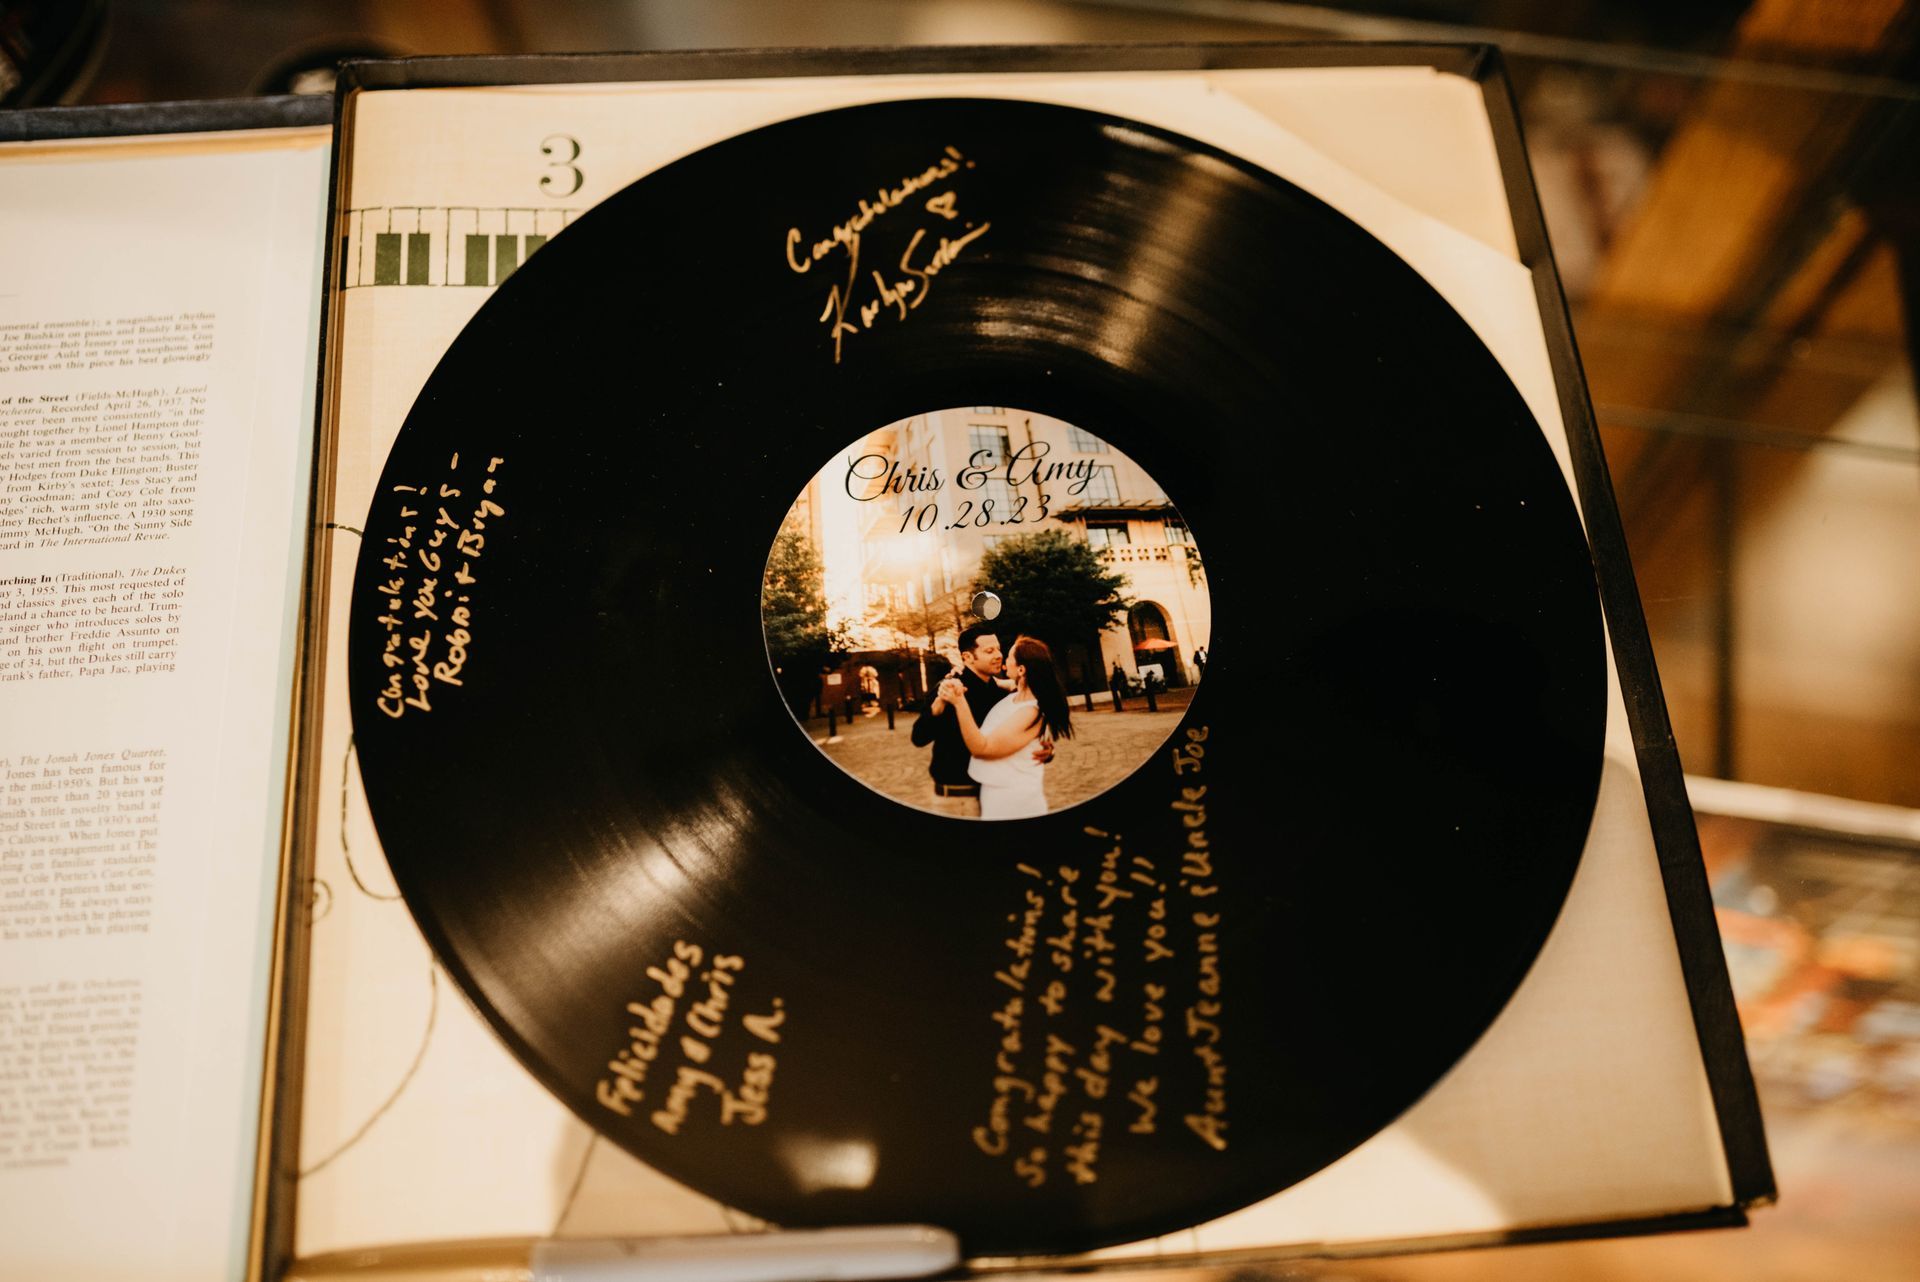 a record with chris and amy written on it